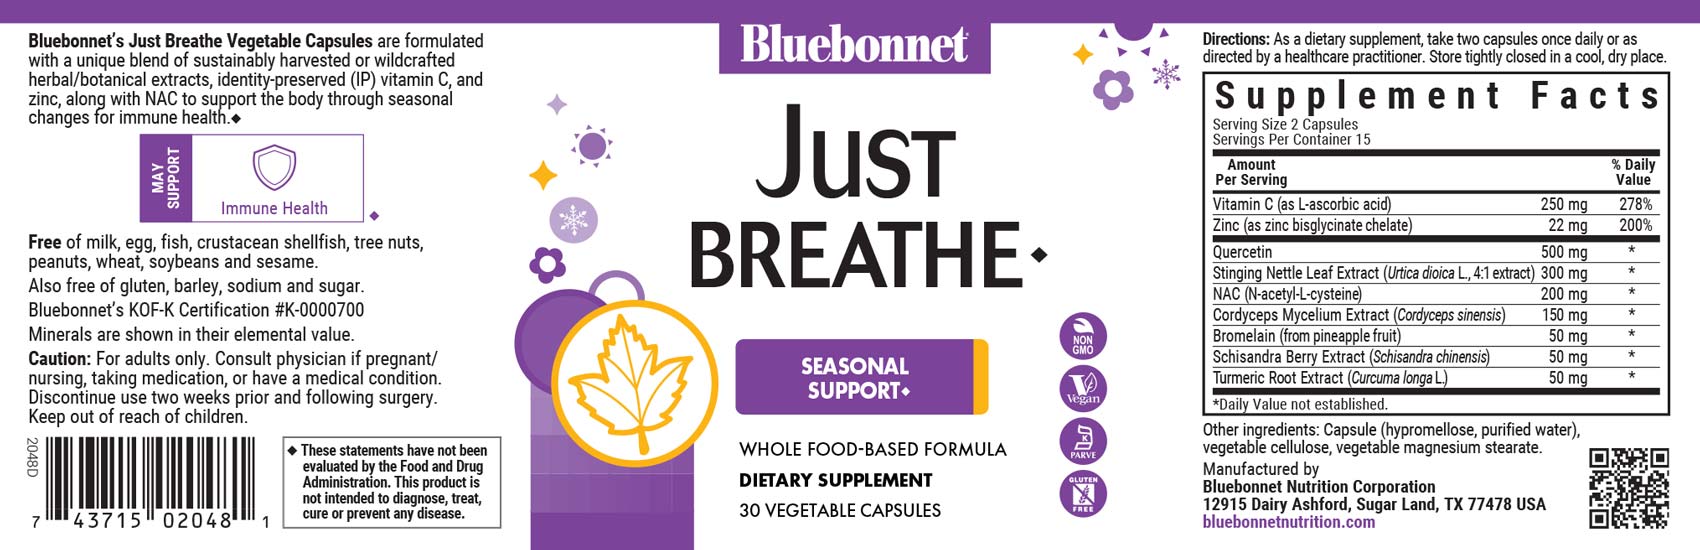 Bluebonnet's Targeted Choice Justbreathe. 30 vegetable capsules